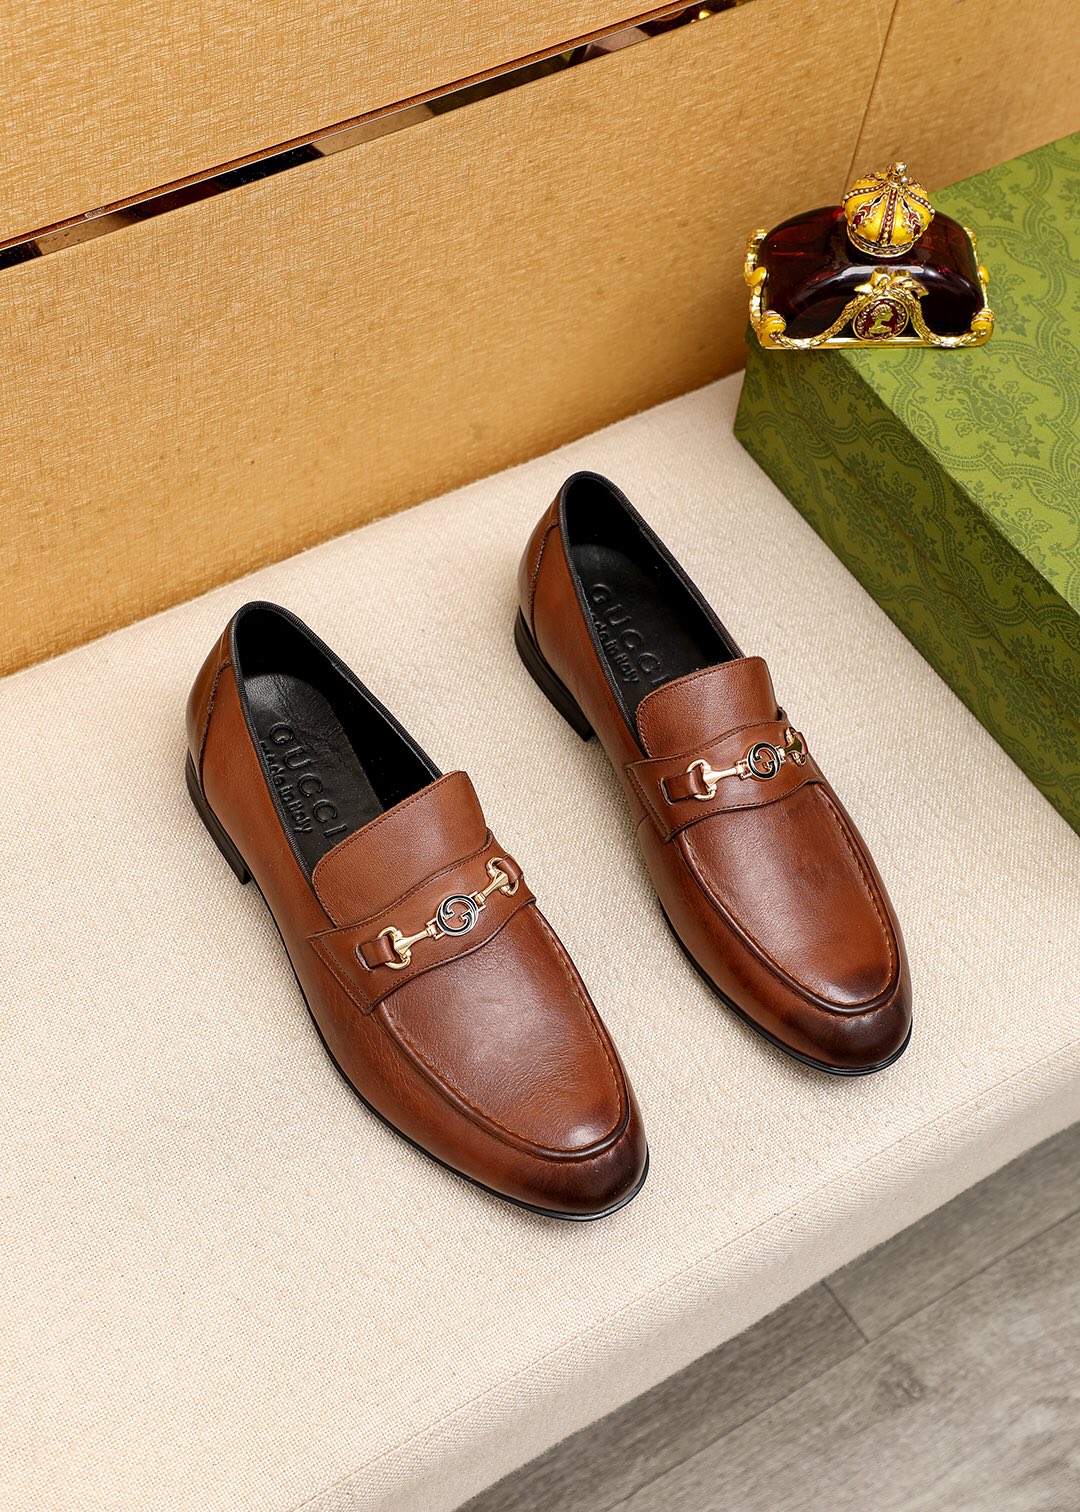 Product: Gucci "Gucci" casual leather shoes in regular sizes 38-44 (customized at 45️) Pro